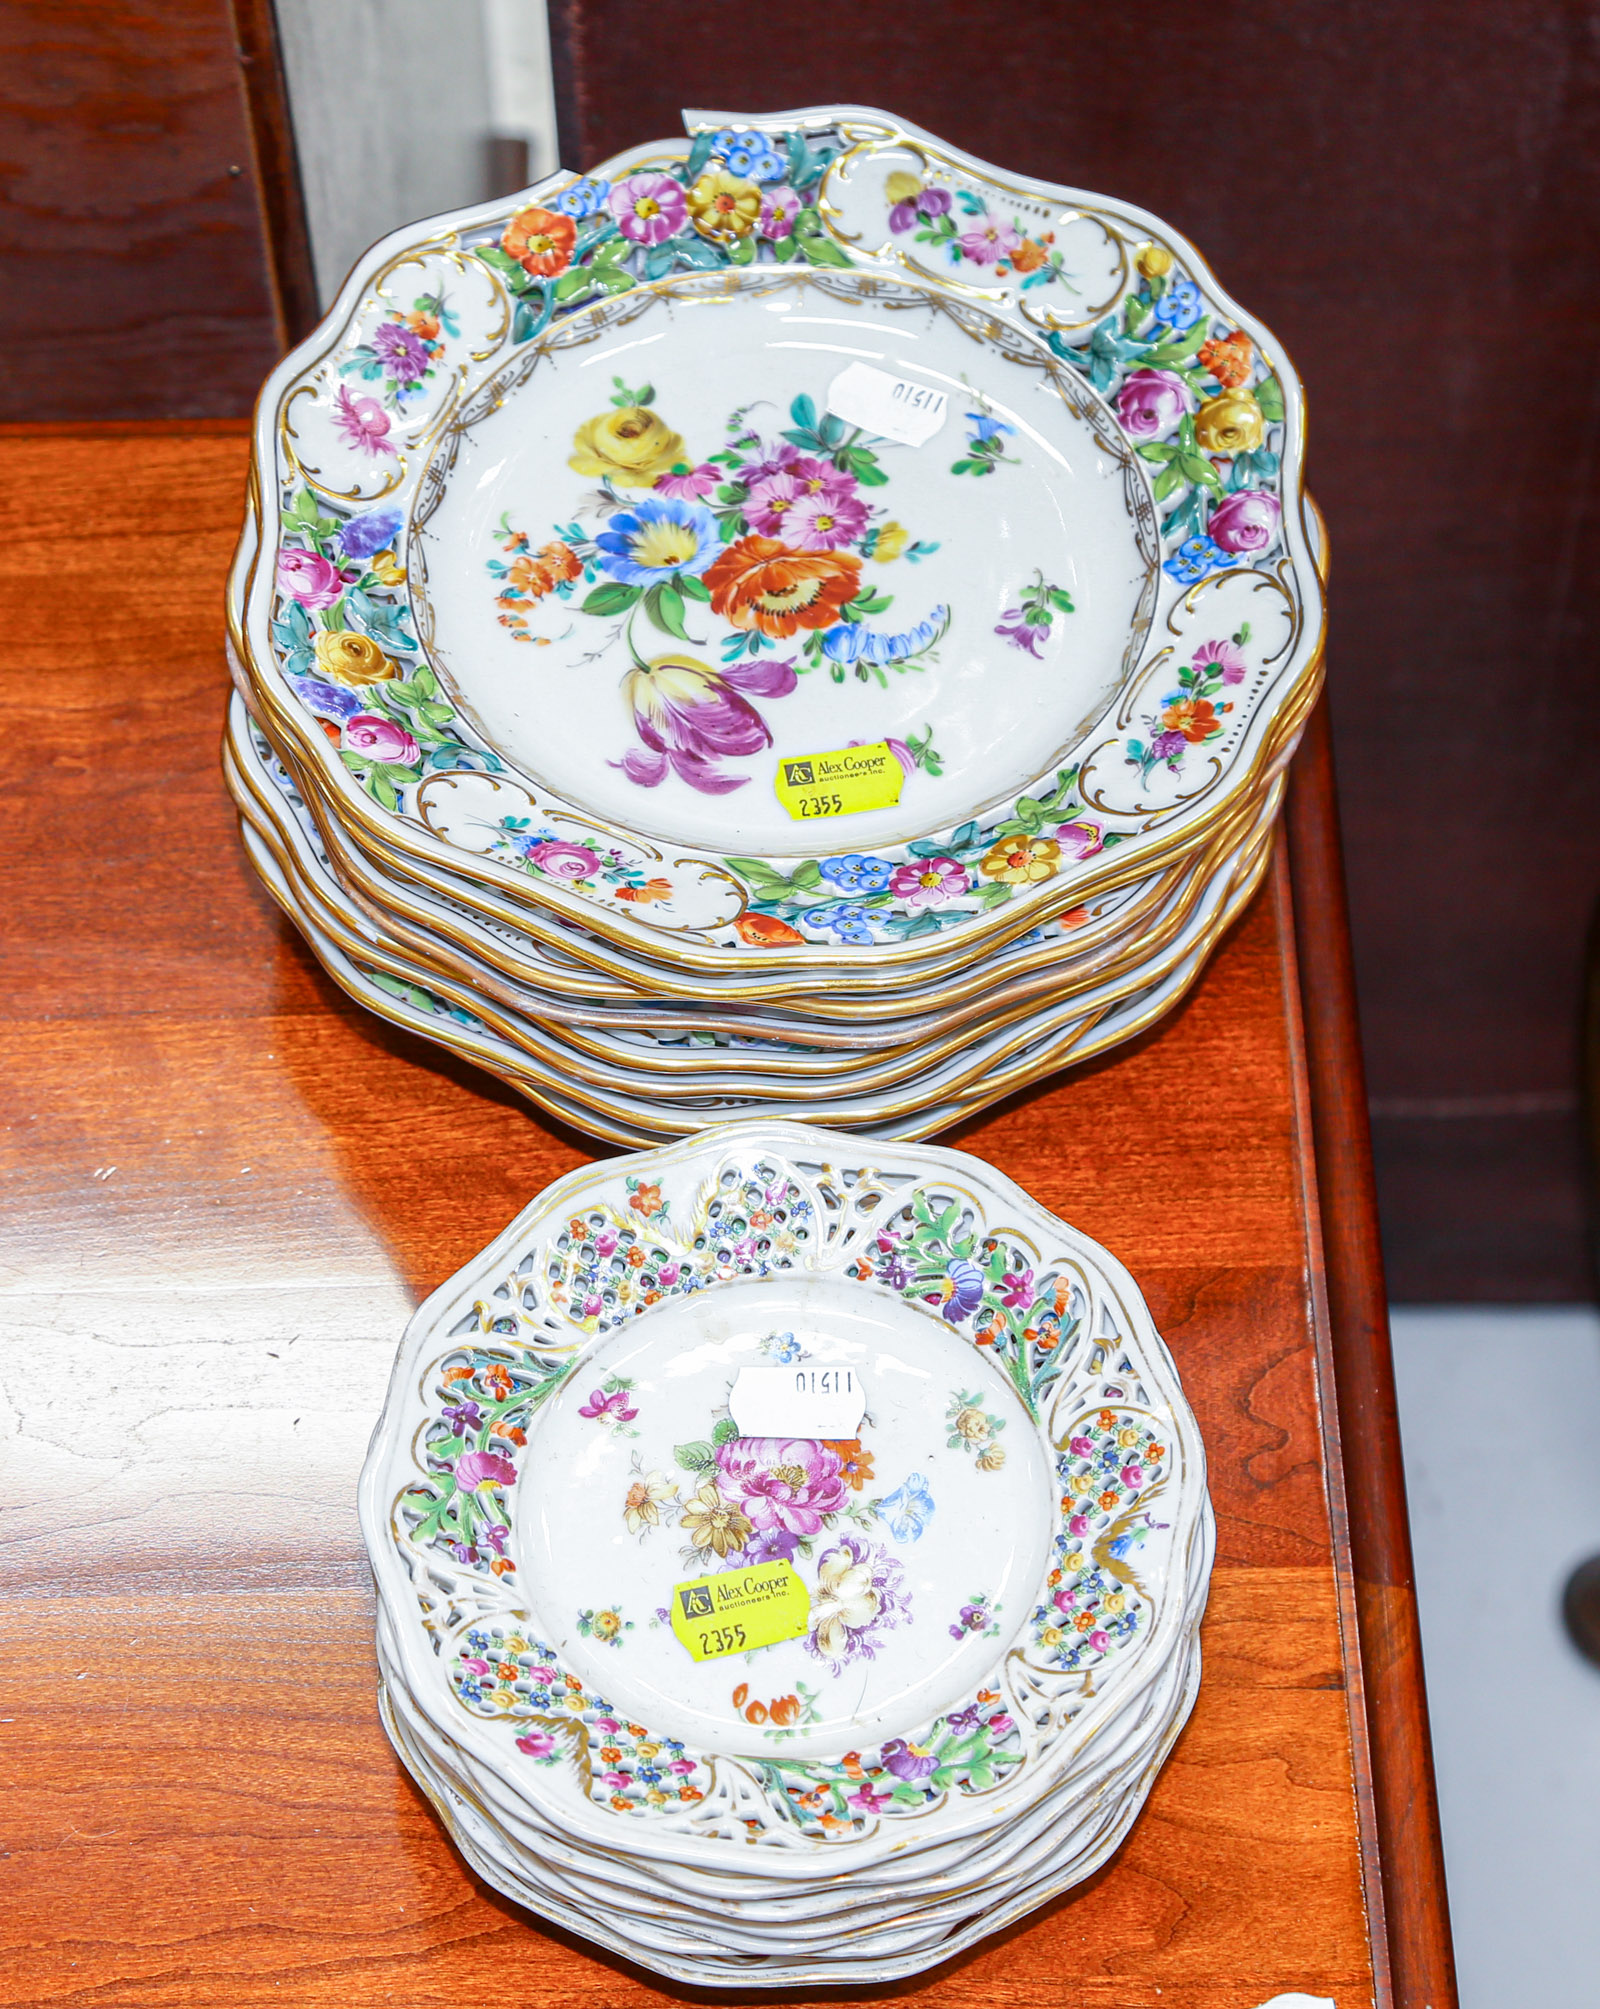 GROUP OF DRESDEN CHINA PLATES Early